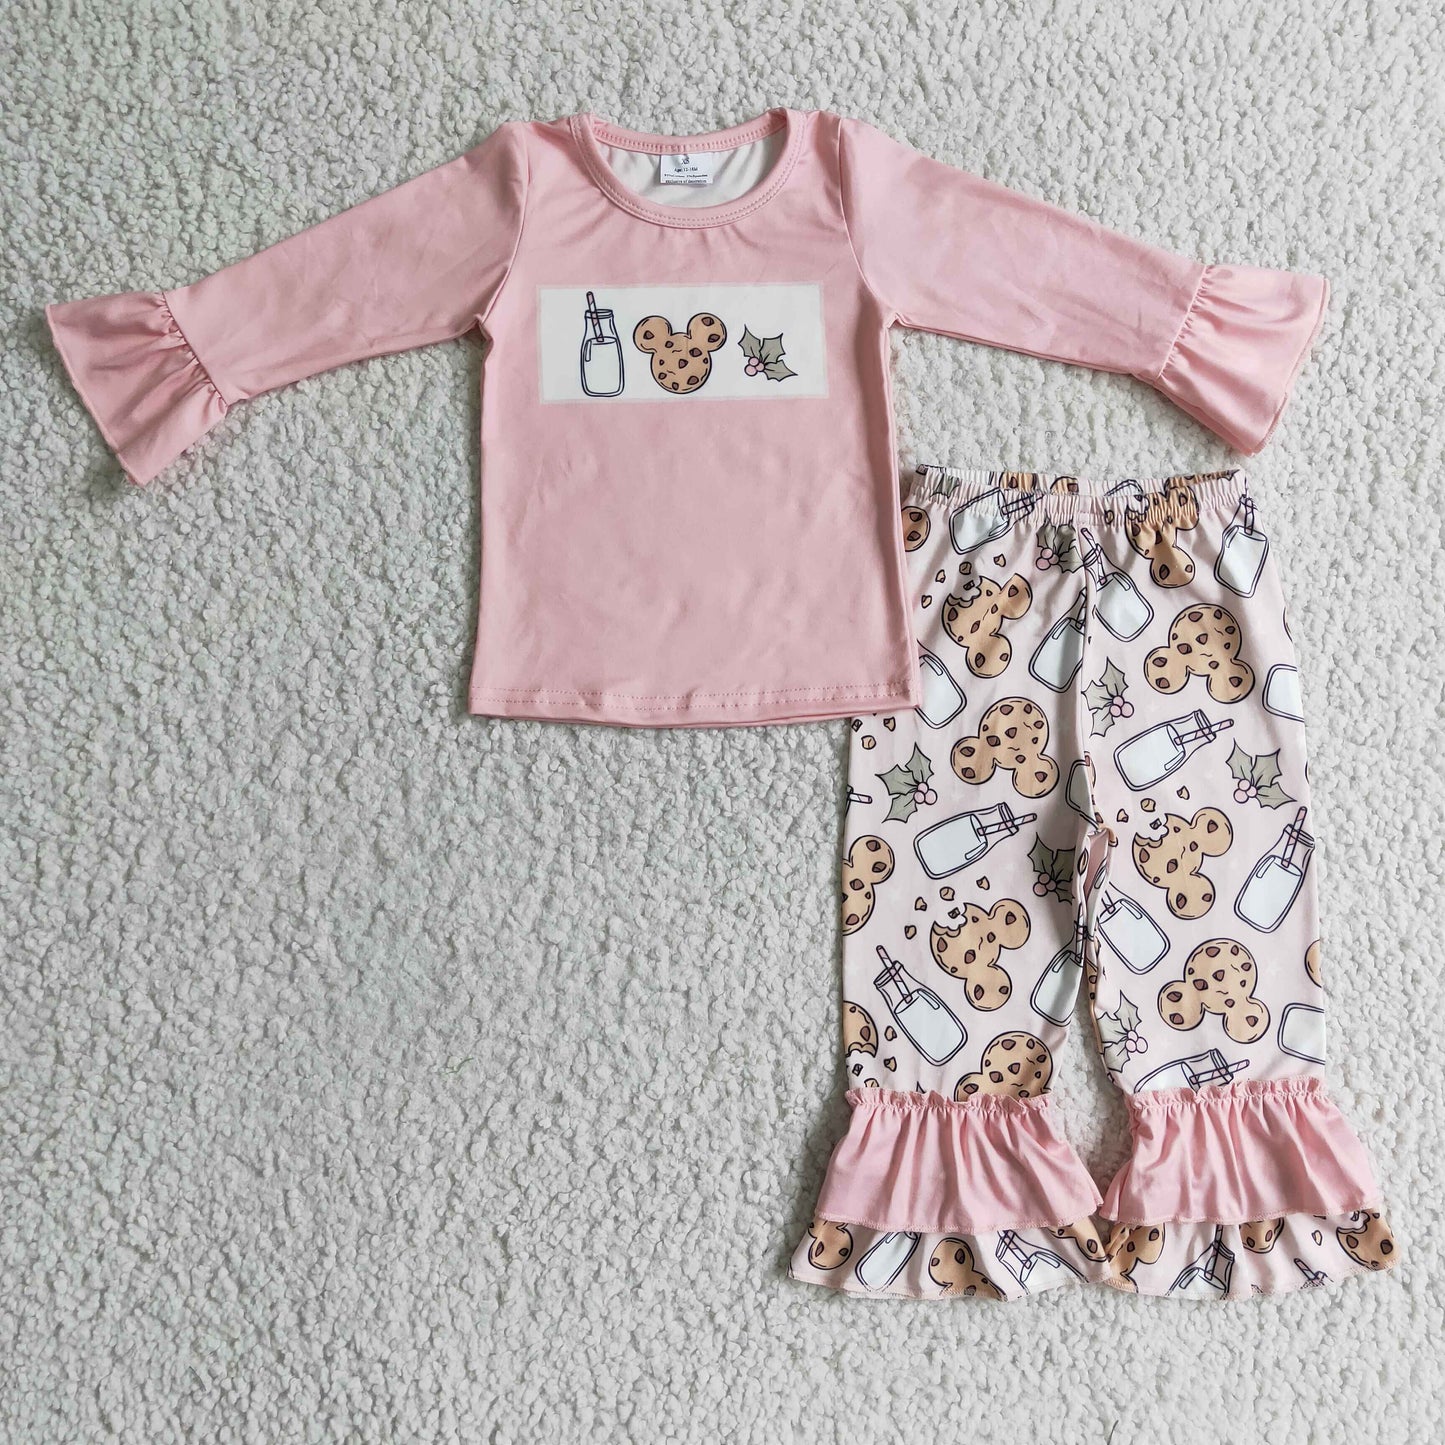 girls pink Christmas outfit